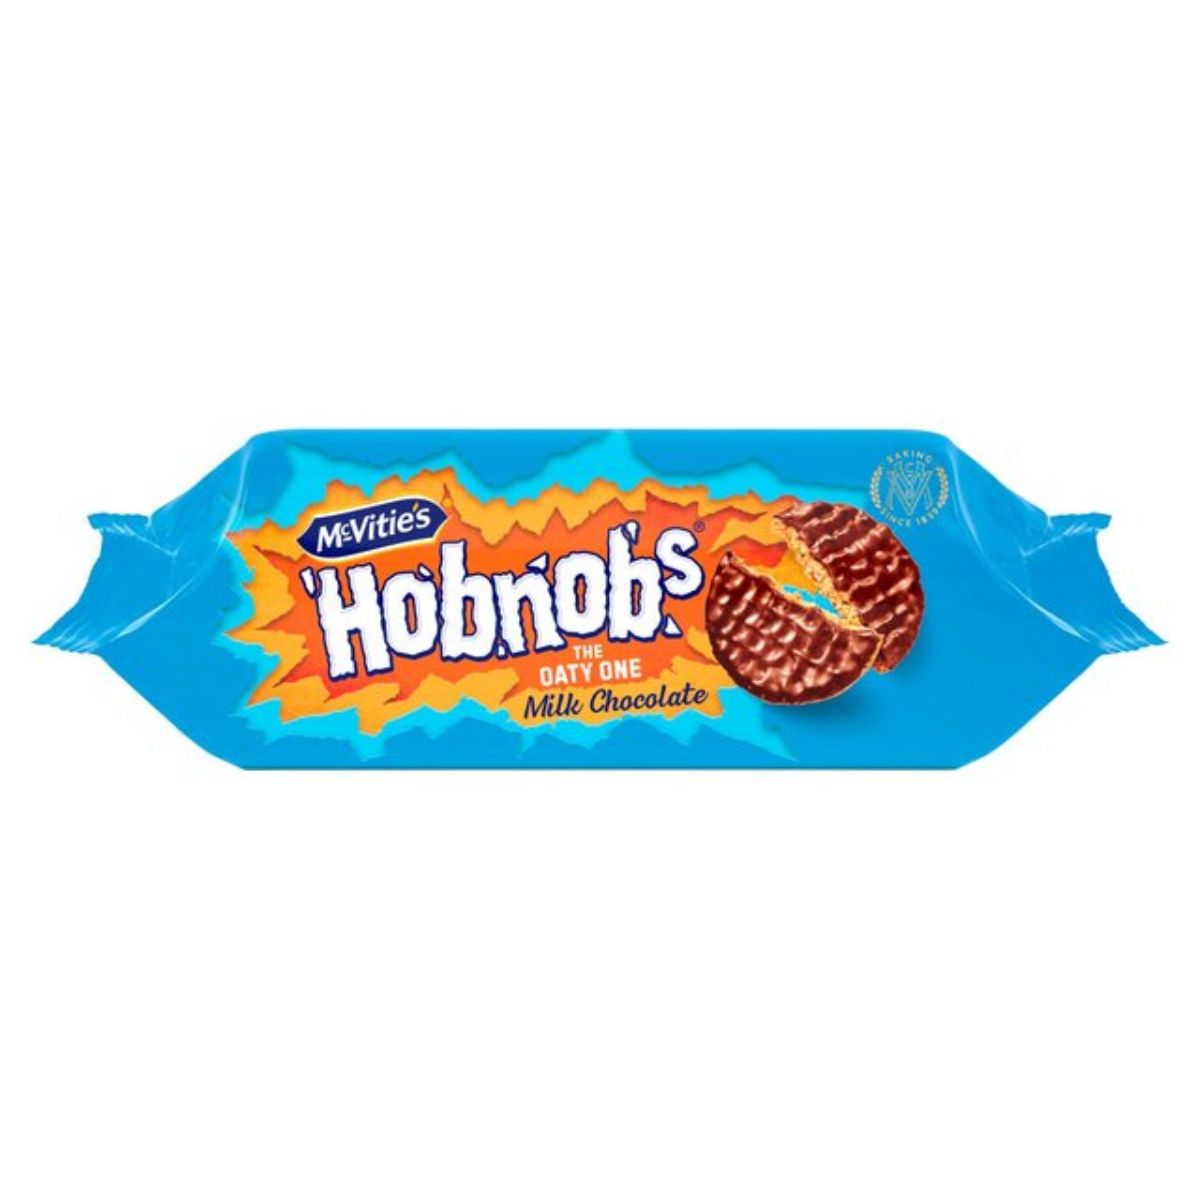 Mcvities - Hobnobs The Oaty One Milk Chocolate - 262g on a white background.